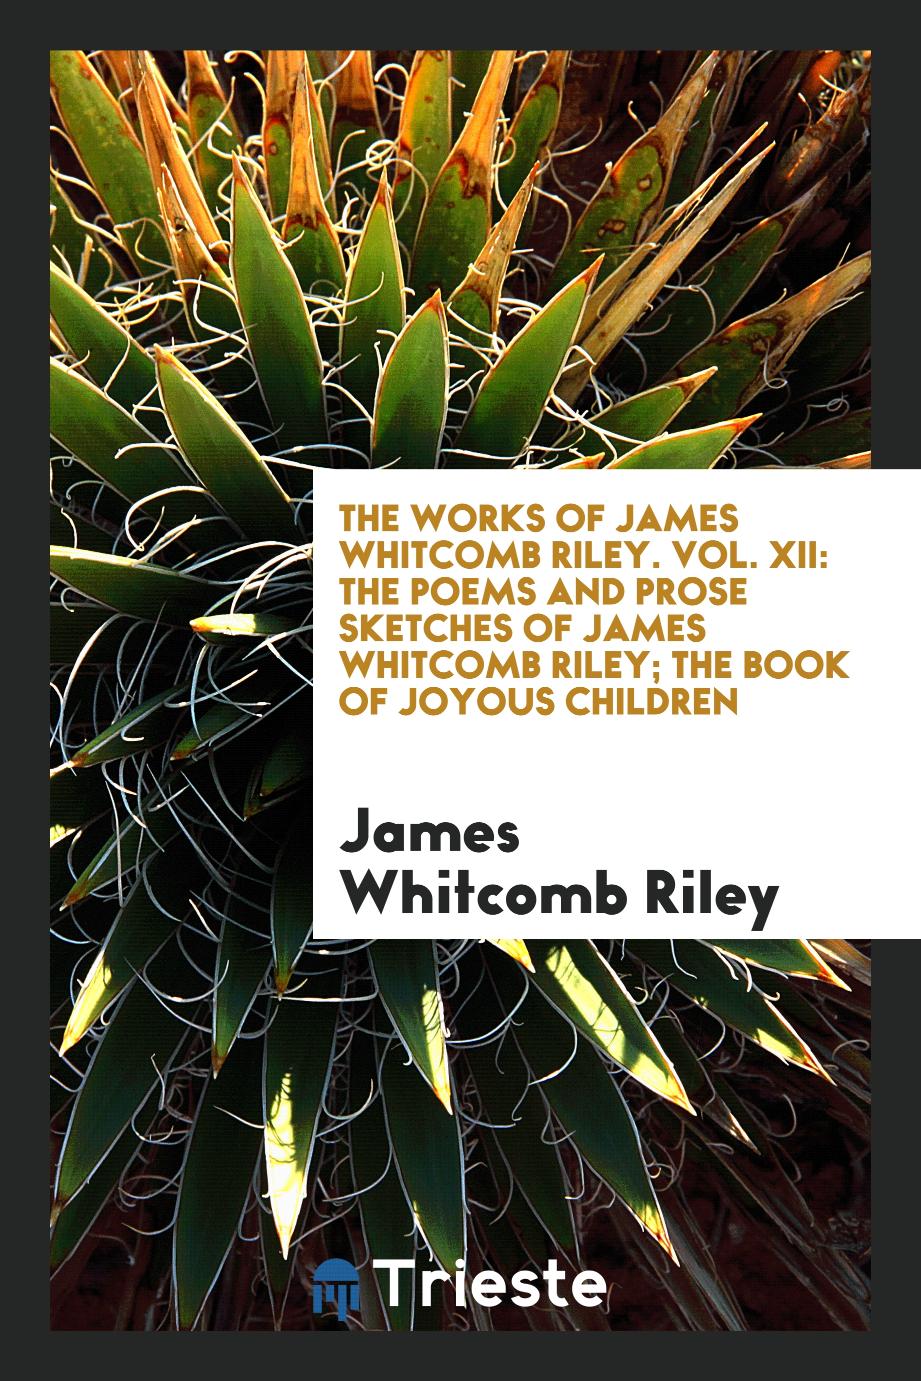 The Works of James Whitcomb Riley. Vol. XII: The Poems and Prose Sketches of James Whitcomb Riley; The Book of Joyous Children